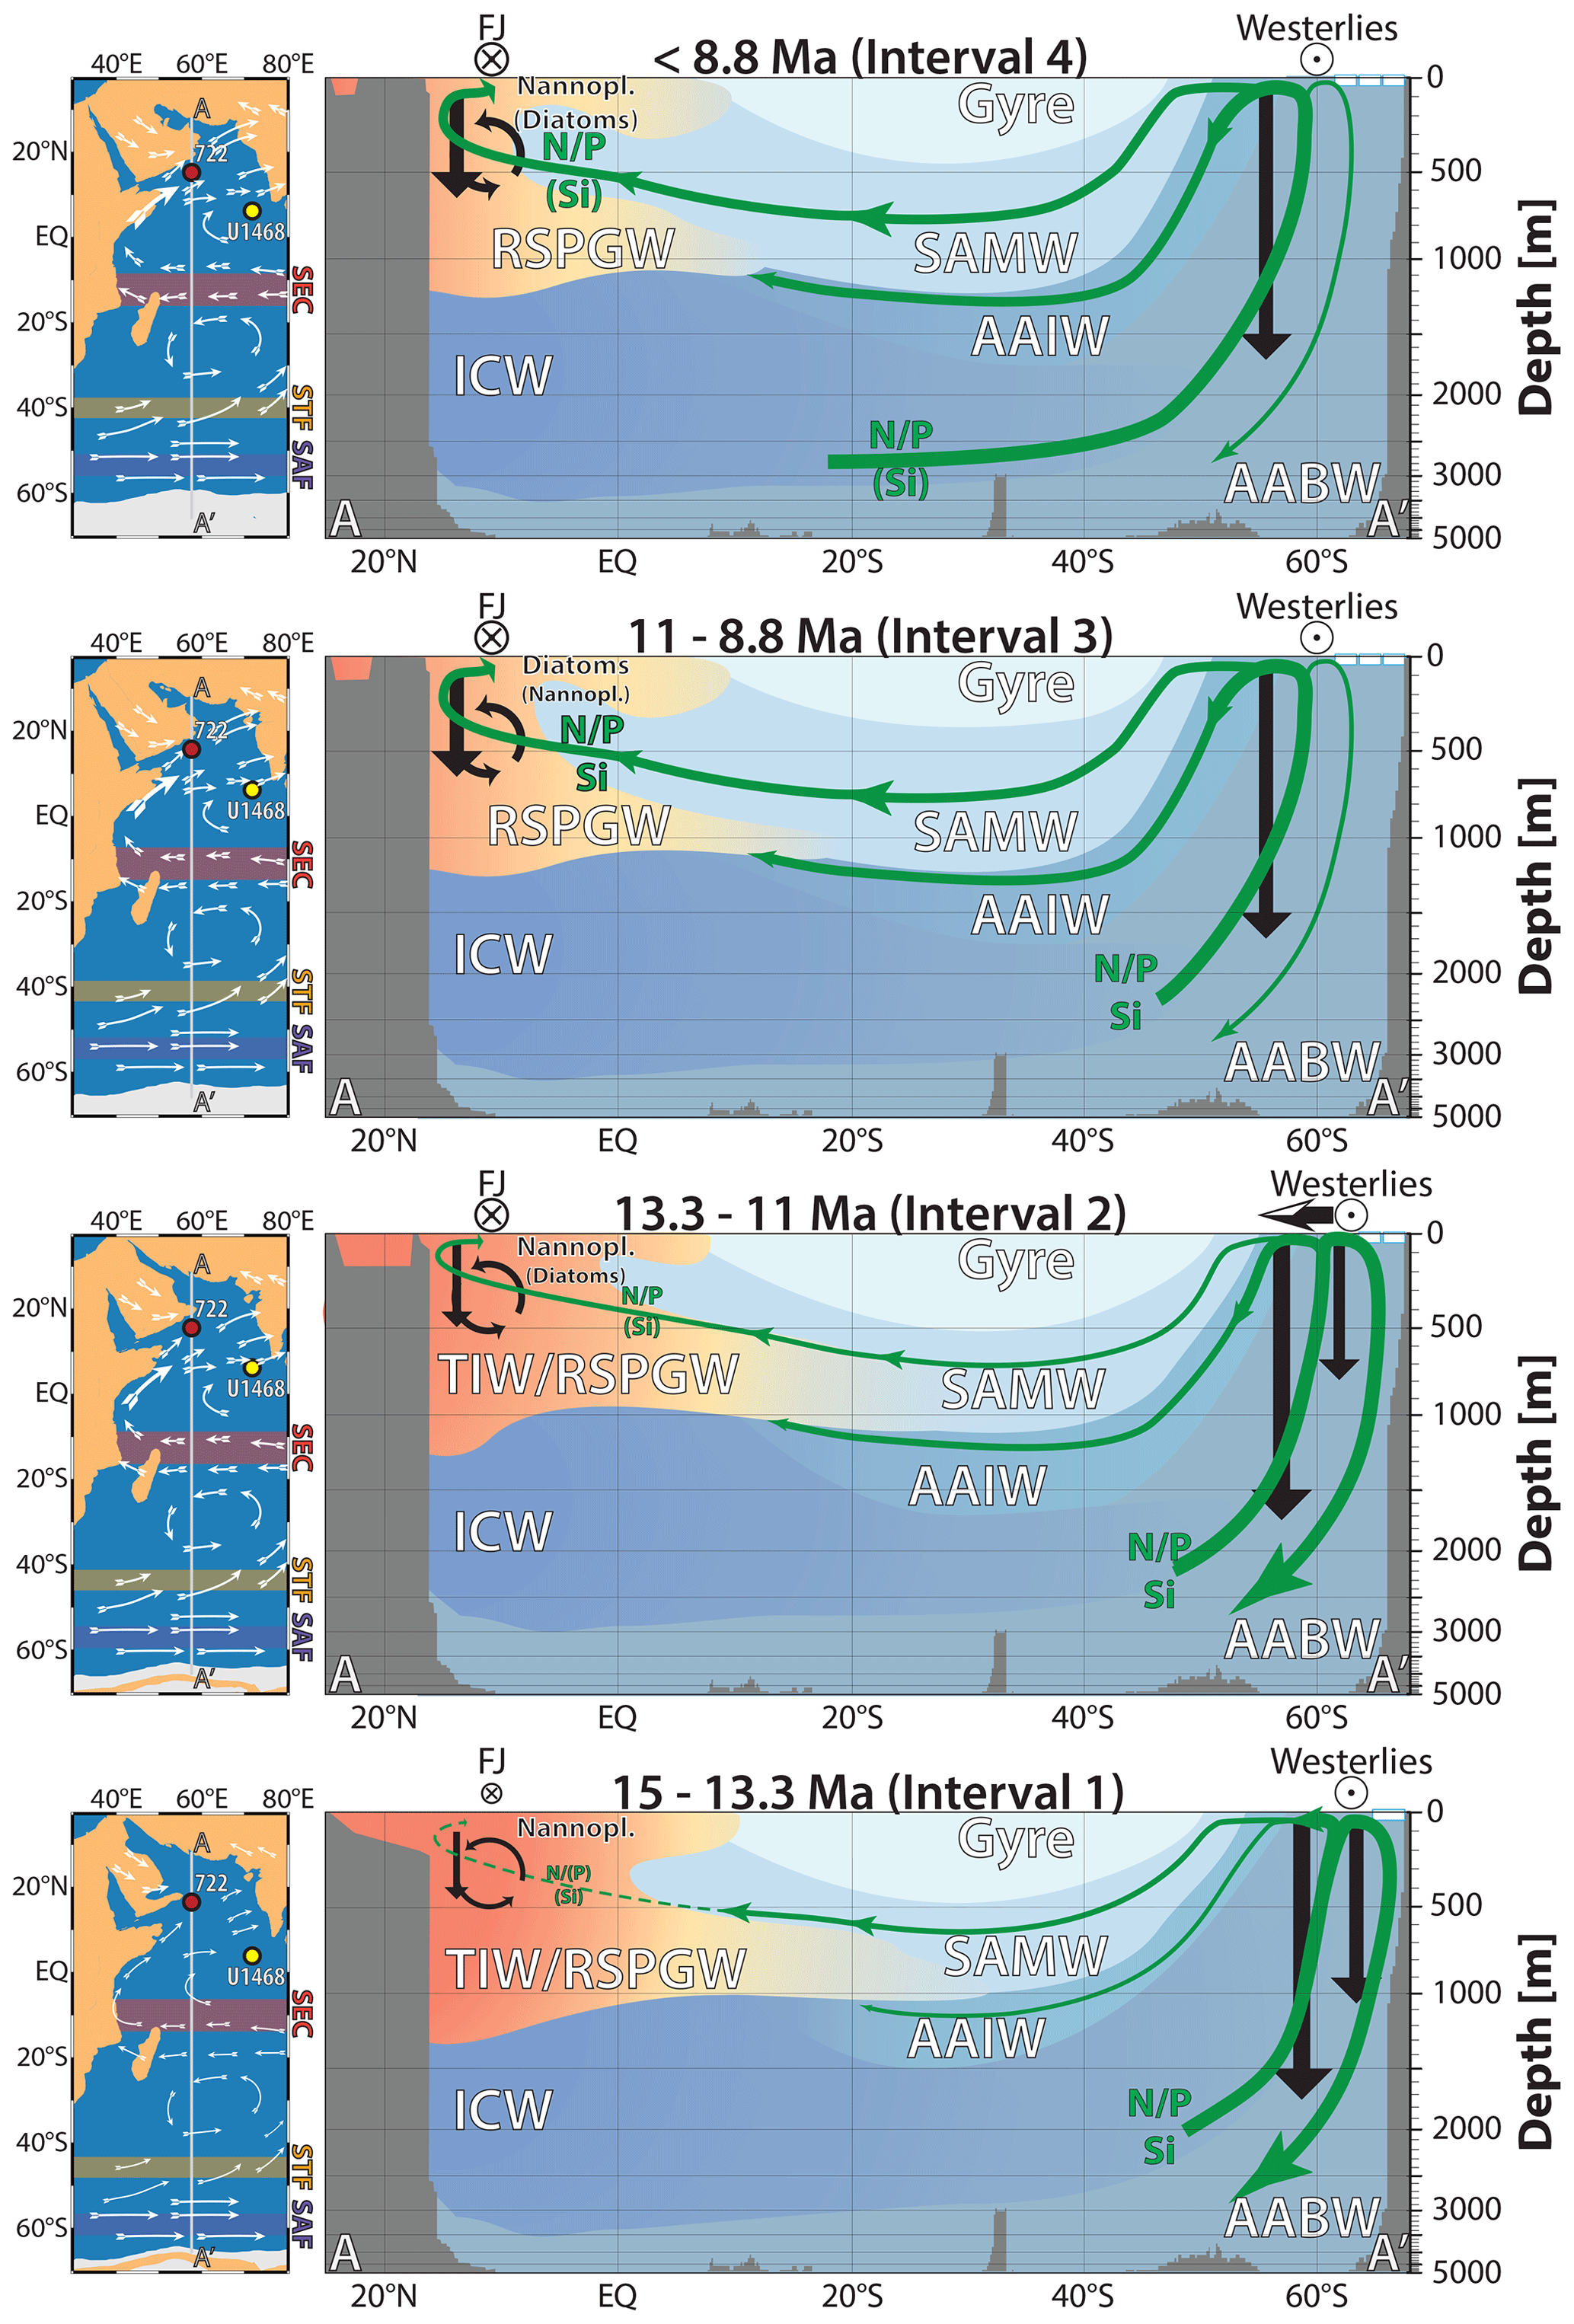 CP - Biotic response of plankton communities to Middle to Late Miocene  monsoon wind and nutrient flux changes in the Oman margin upwelling zone